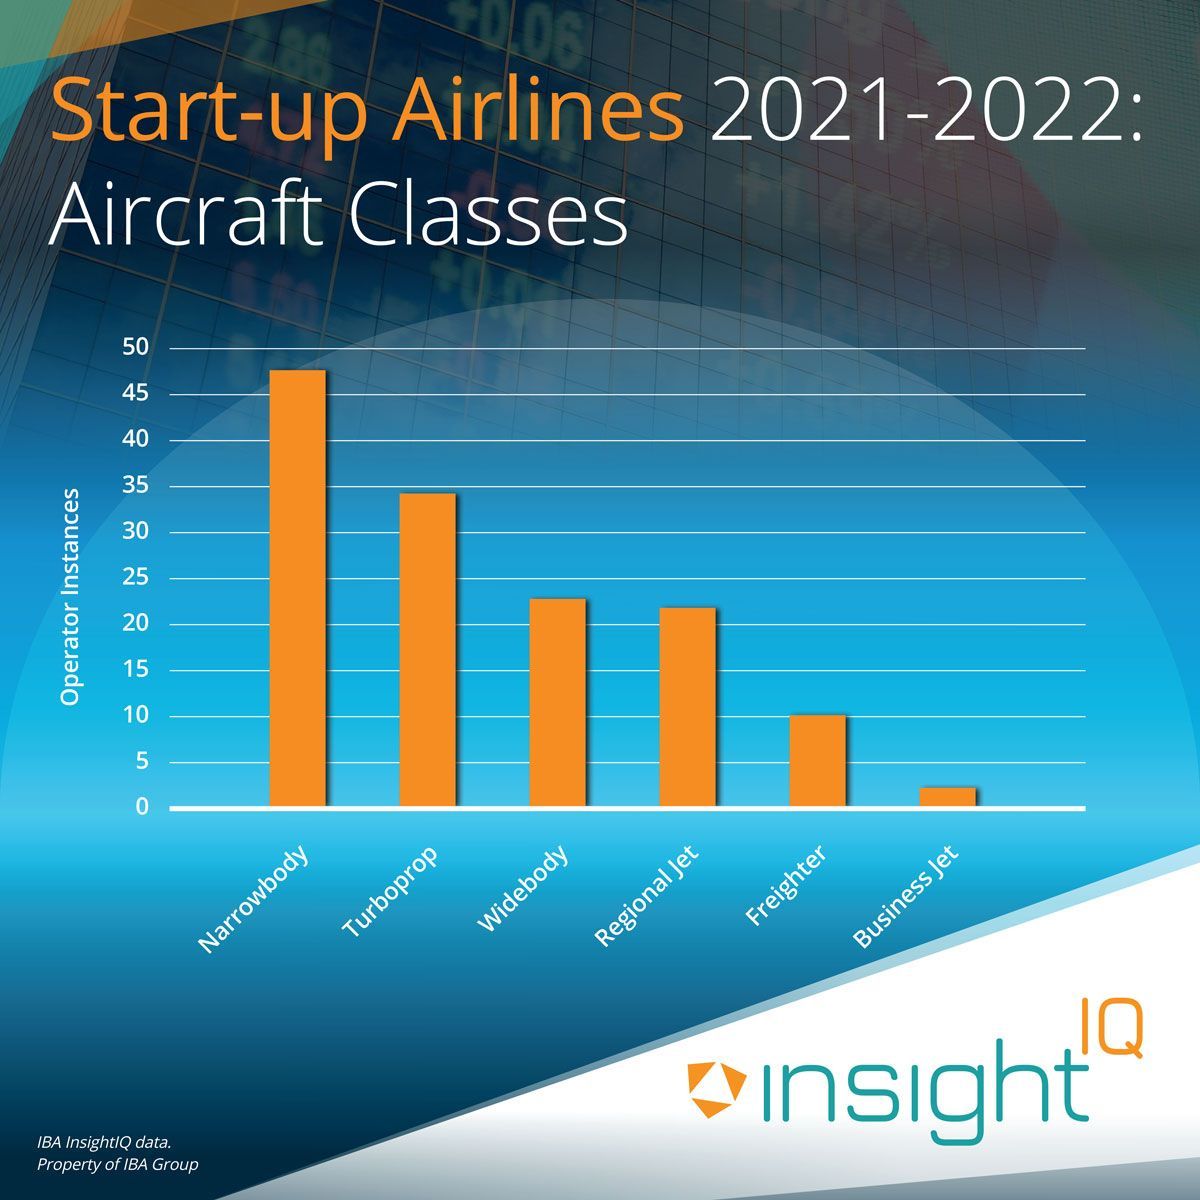 Classes of aircraft favoured by start-up airlines 2021-2022